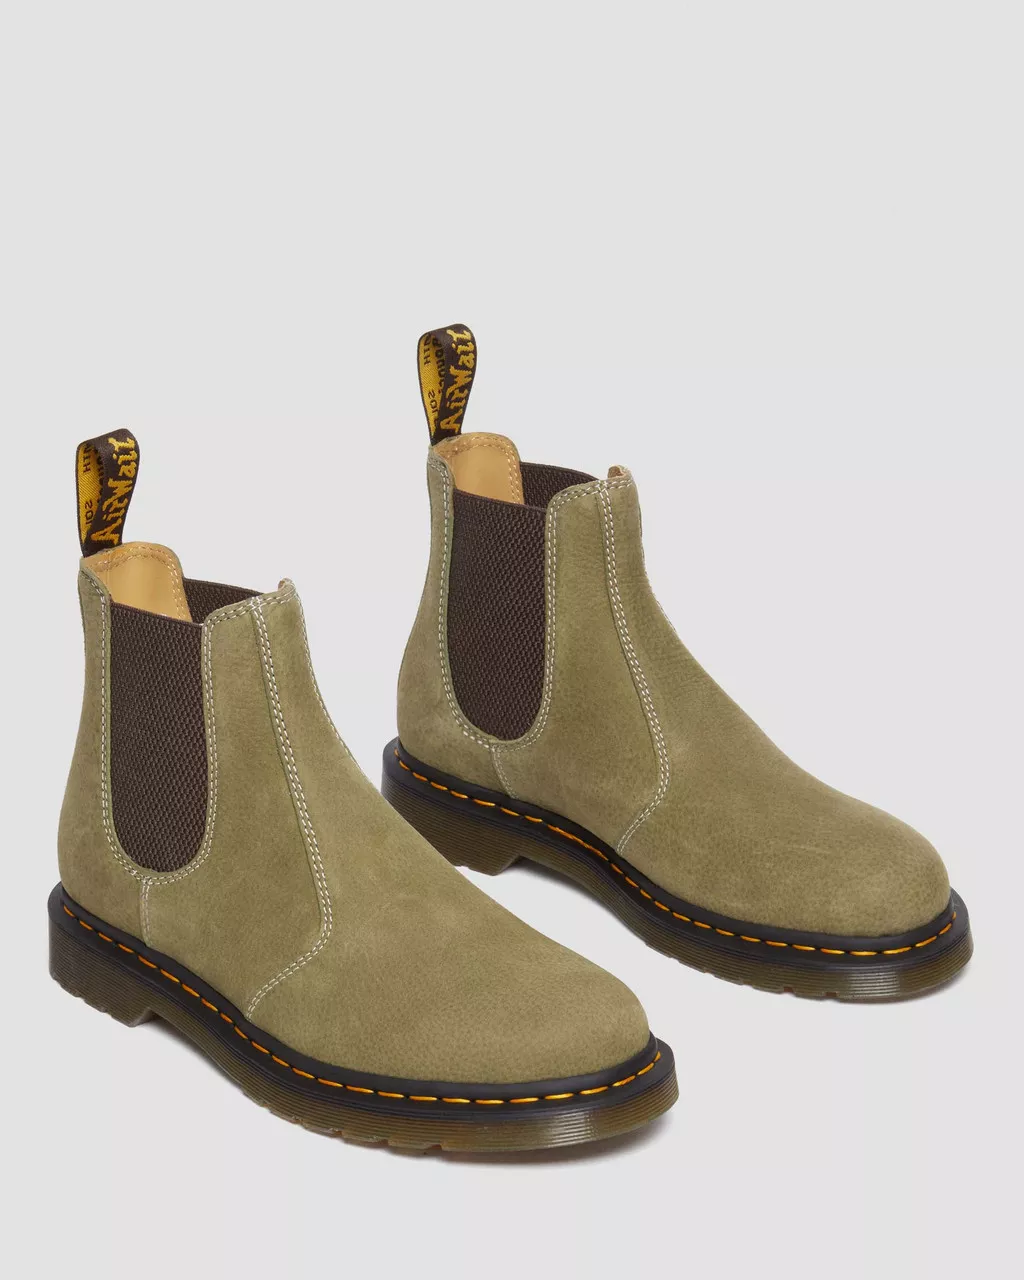 Dr. Martens 2976 Tumbled Nubuck Leder Chelsea Boots in Muted Olive 